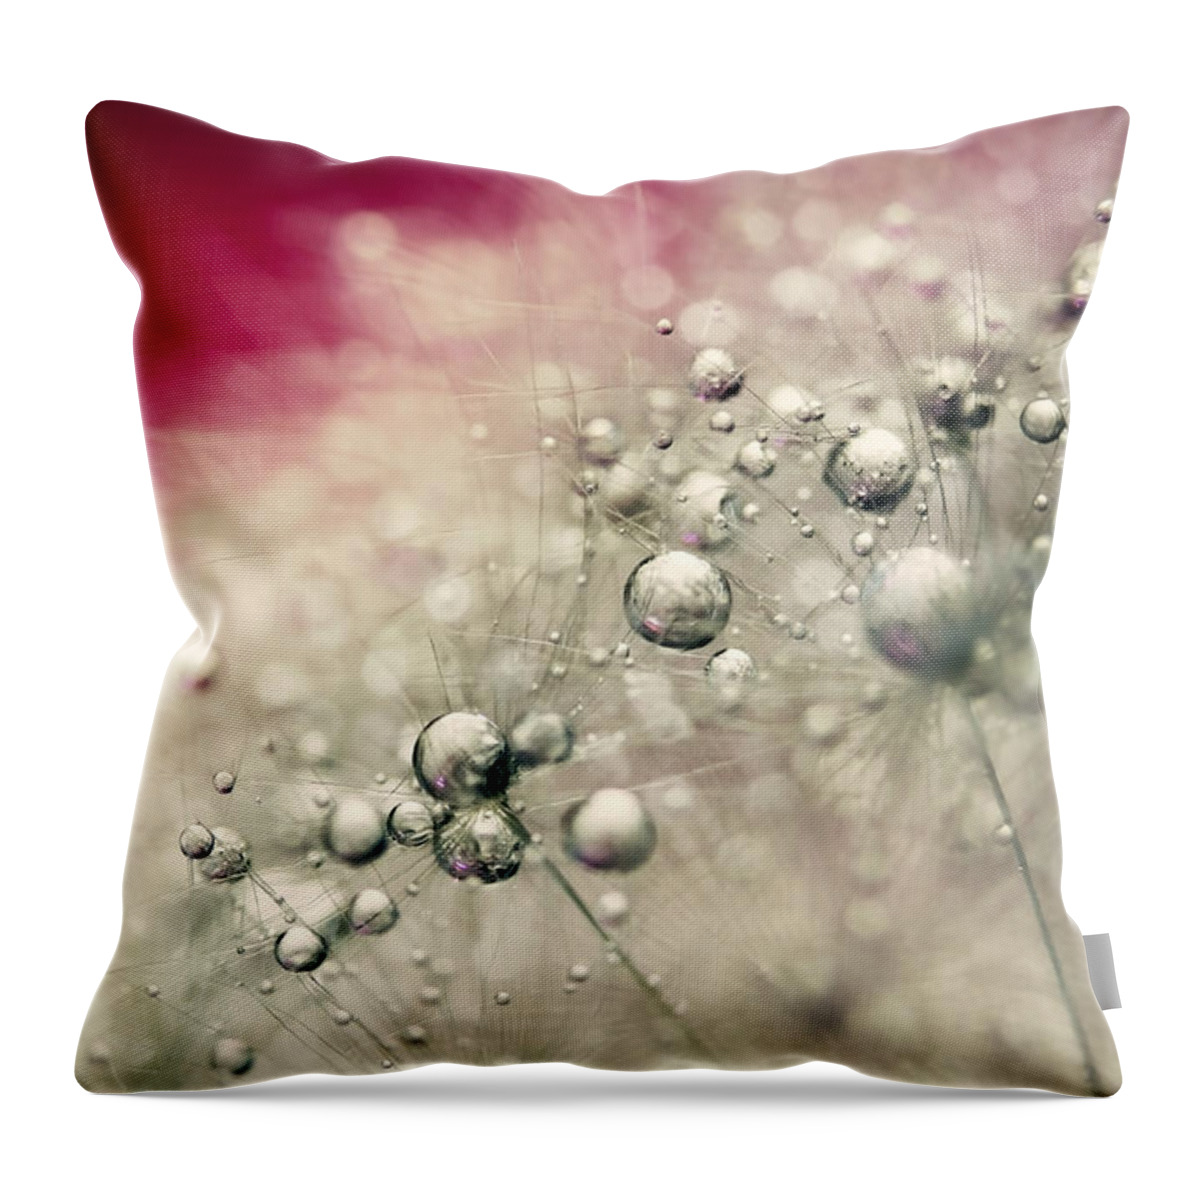 Dandelion Throw Pillow featuring the photograph Cherry Dandy Drops by Sharon Johnstone